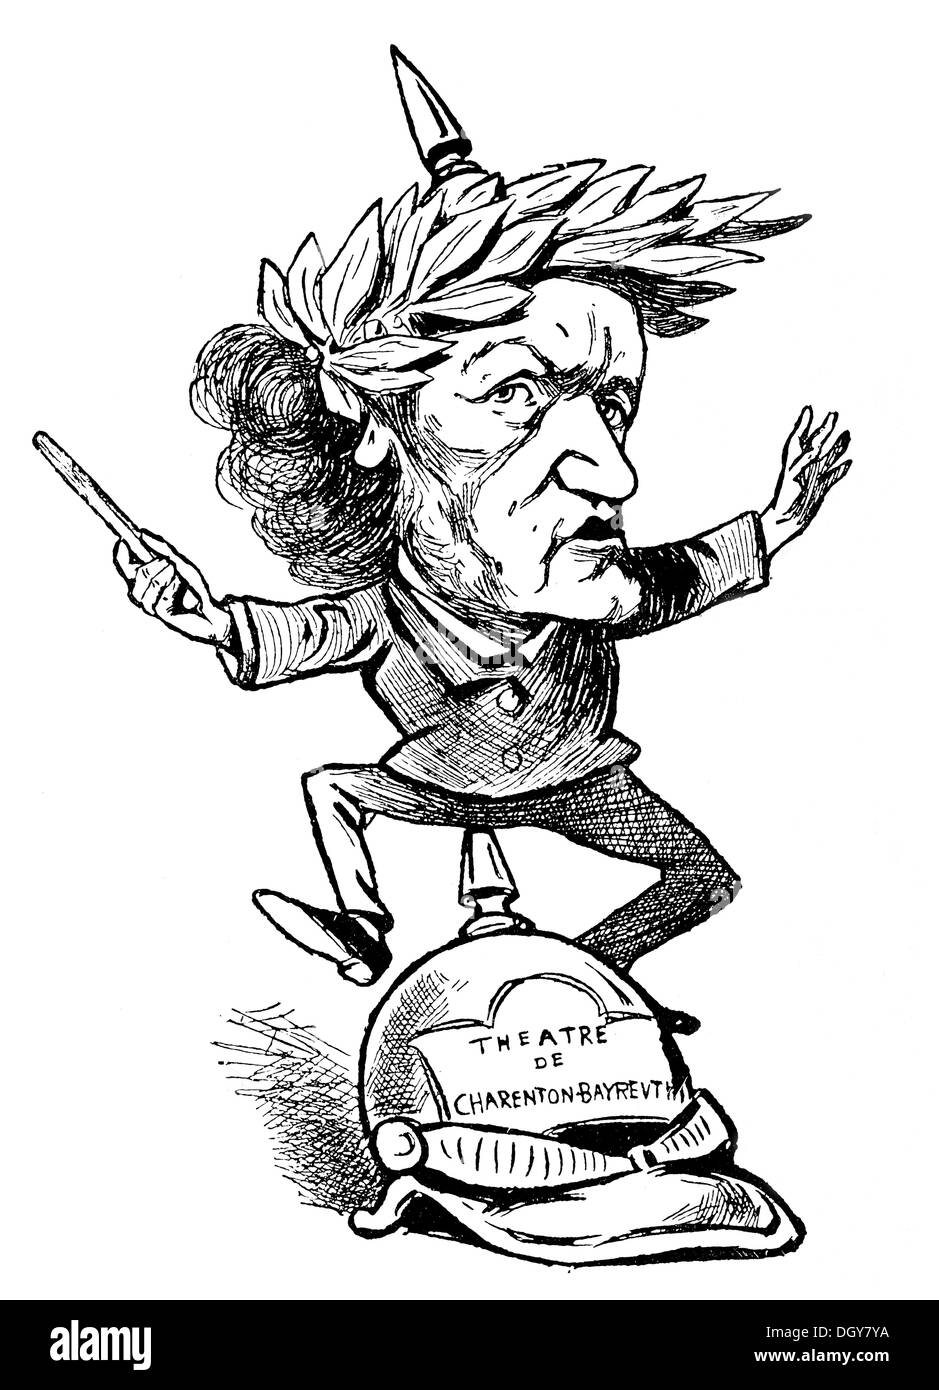 Caricature of Richard Wagner, August 1876, illustration from the yearbook 'Moderne Kunst in Meisterholzschnitten', German for Stock Photo